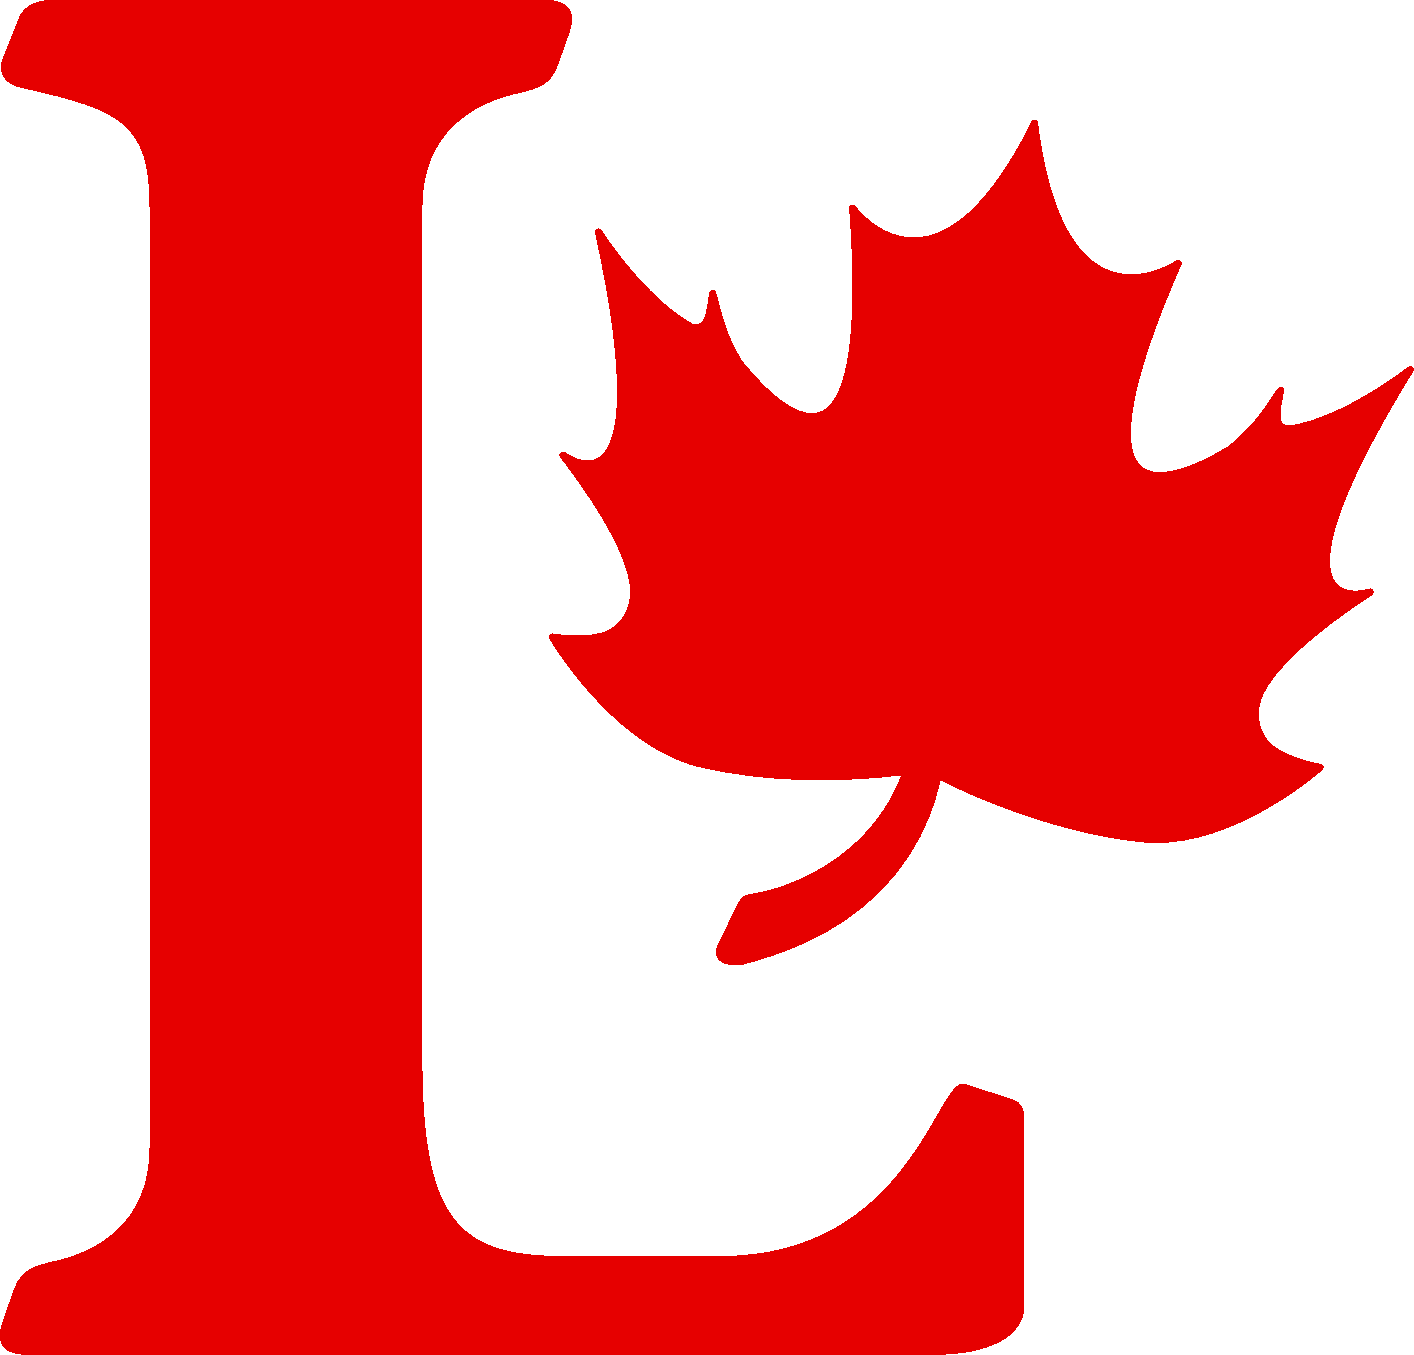 The Liberal Party Of Canada - Liberal Party Of Canada (1414x1355)